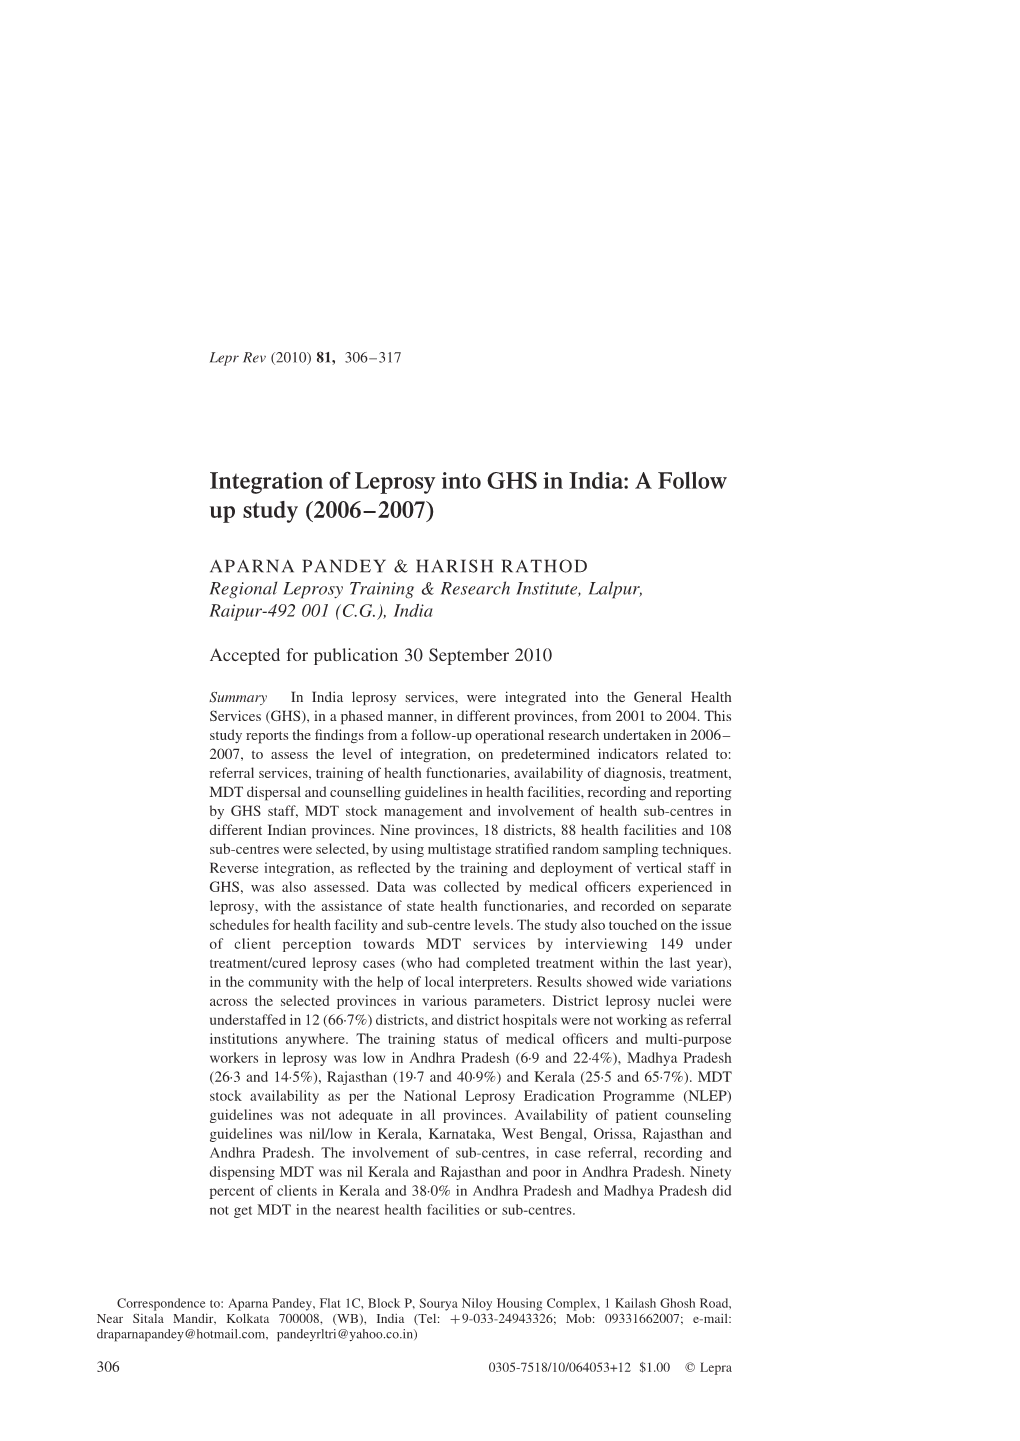 Integration of Leprosy Into GHS in India: a Follow up Study (2006–2007)